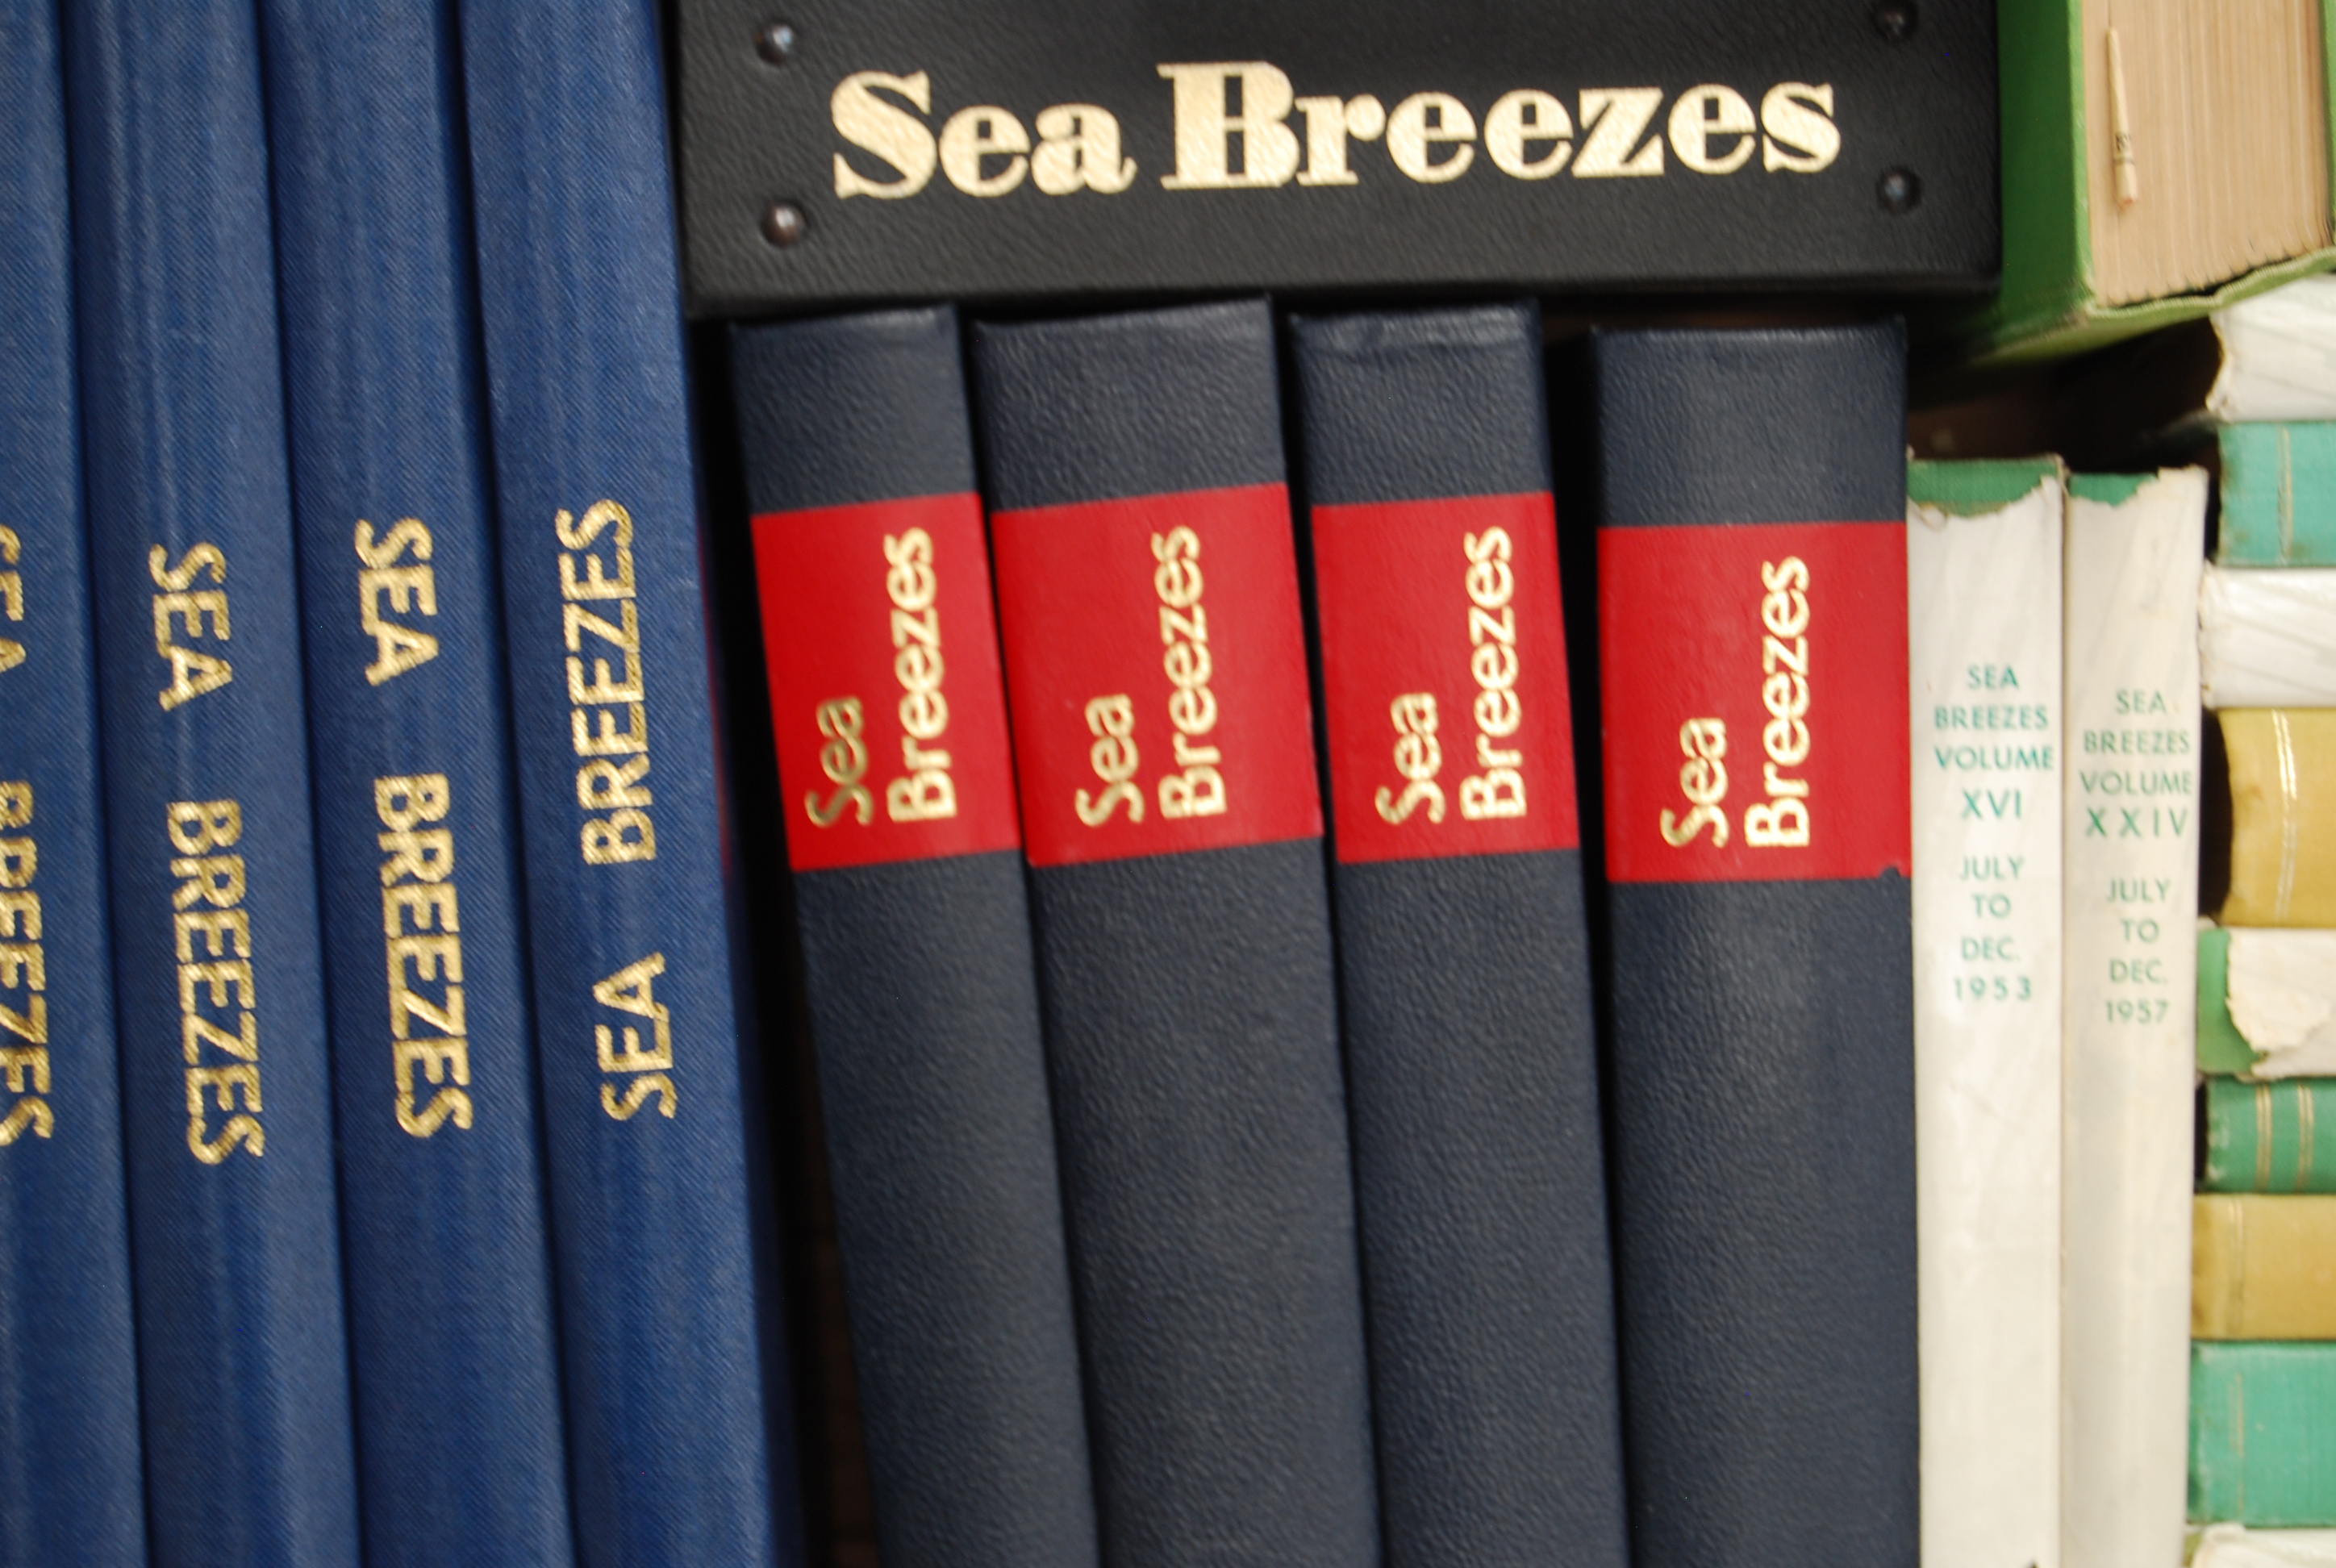 COLLECTION OF SEA BREEZES BOOKS / MAGAZINES - Image 2 of 3